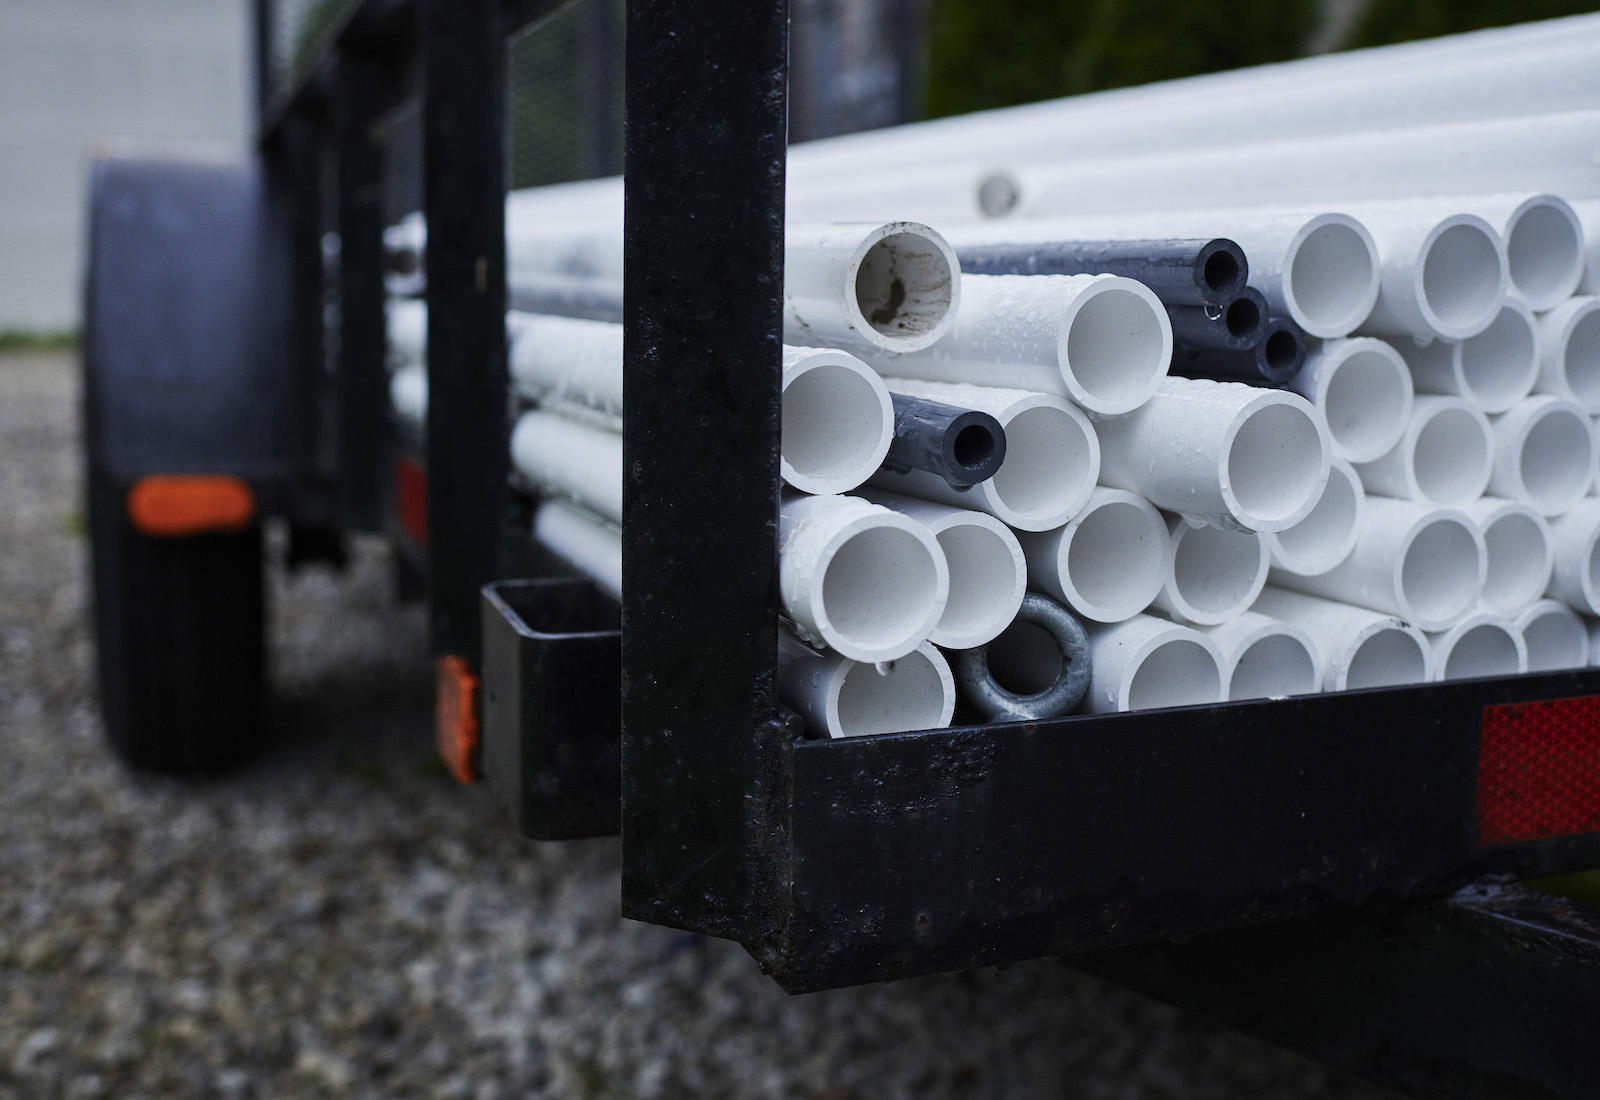 PVC pipes stacked in the back of a truck